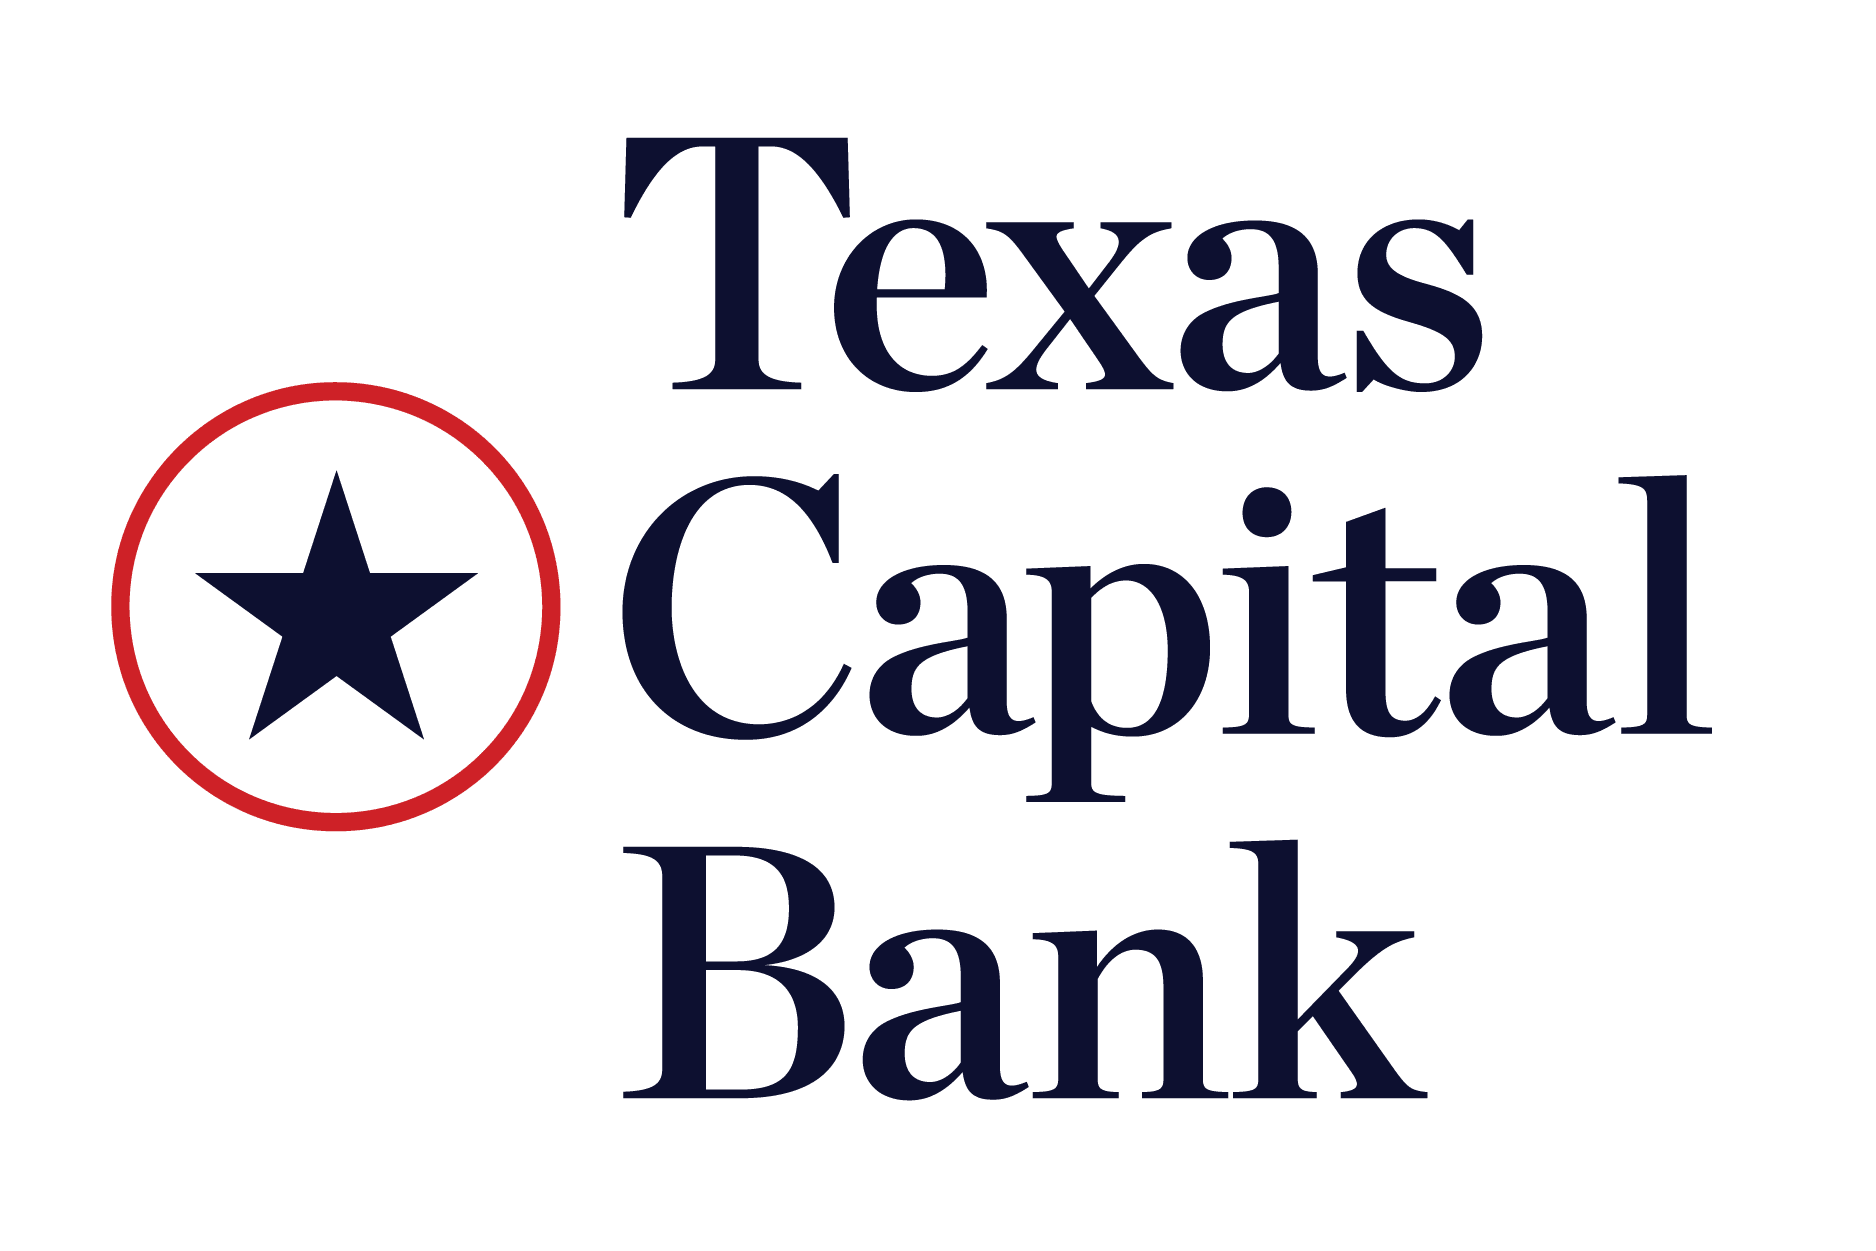 Lee Harris from Executive Director of Retail Transformation Strategy, Texas Capital Bank Headshot Photo at Small Business Expo